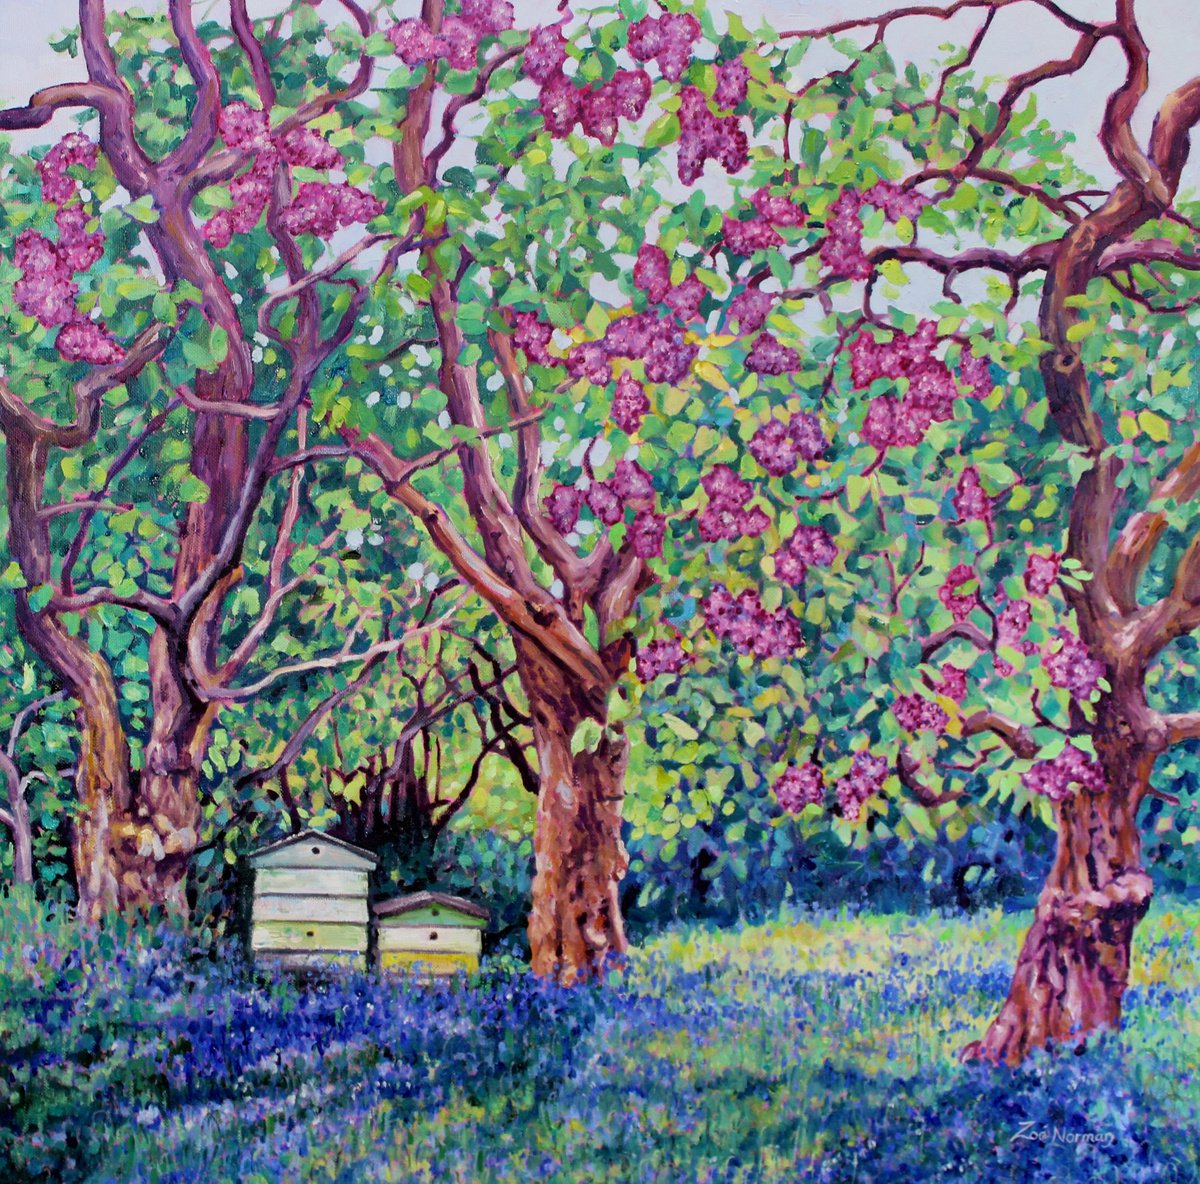 Lilac and Beehives by Zoe Elizabeth Norman